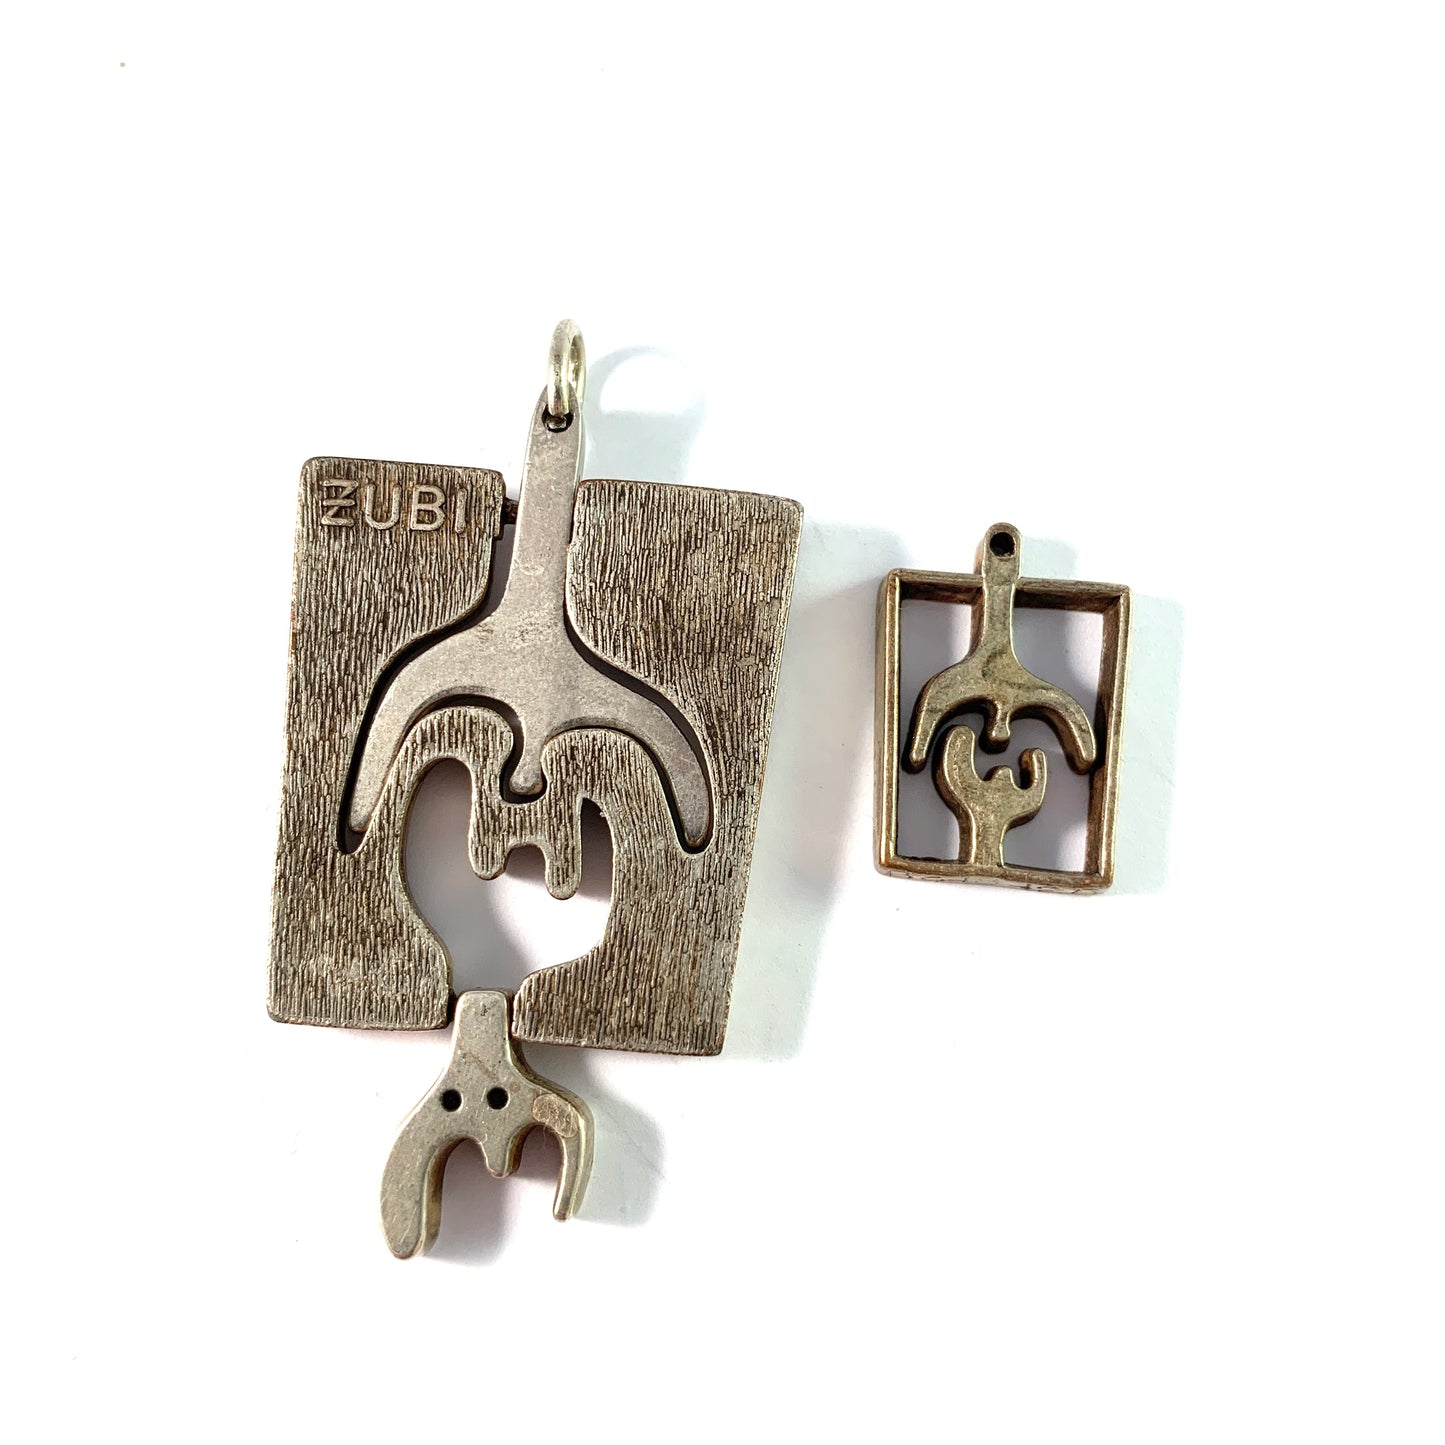 Francisco Baron, Spain 1970s. Vintage Numbered Metal ZUBI Pendant and Charm.